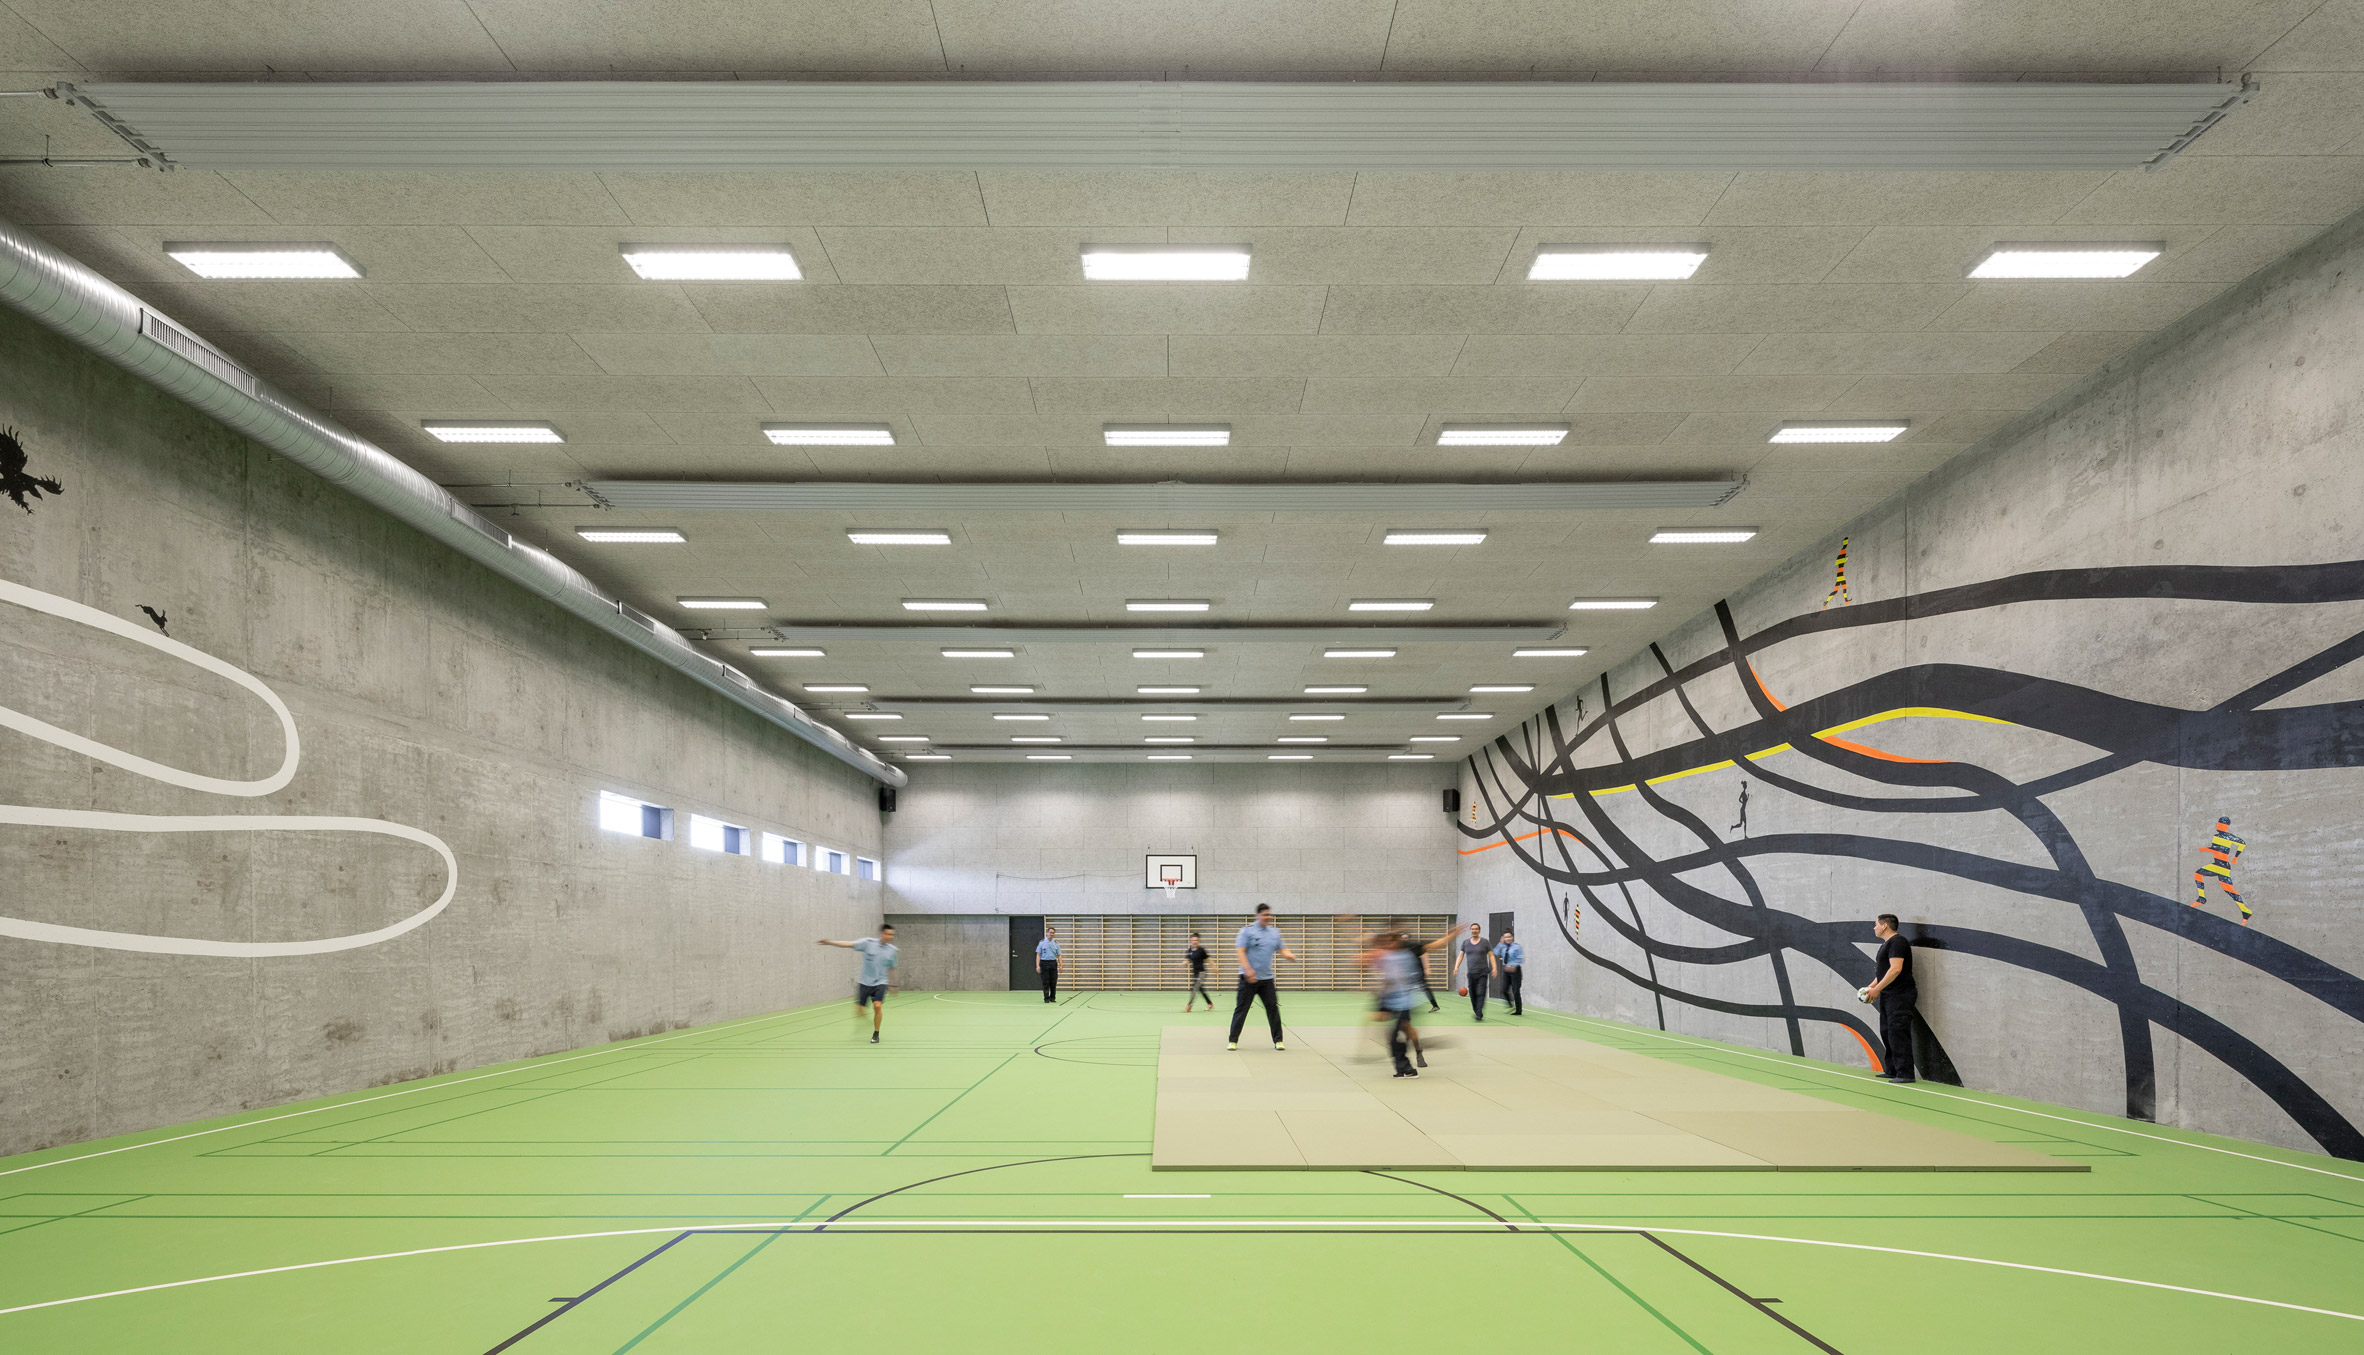 A sports hall with concrete walls